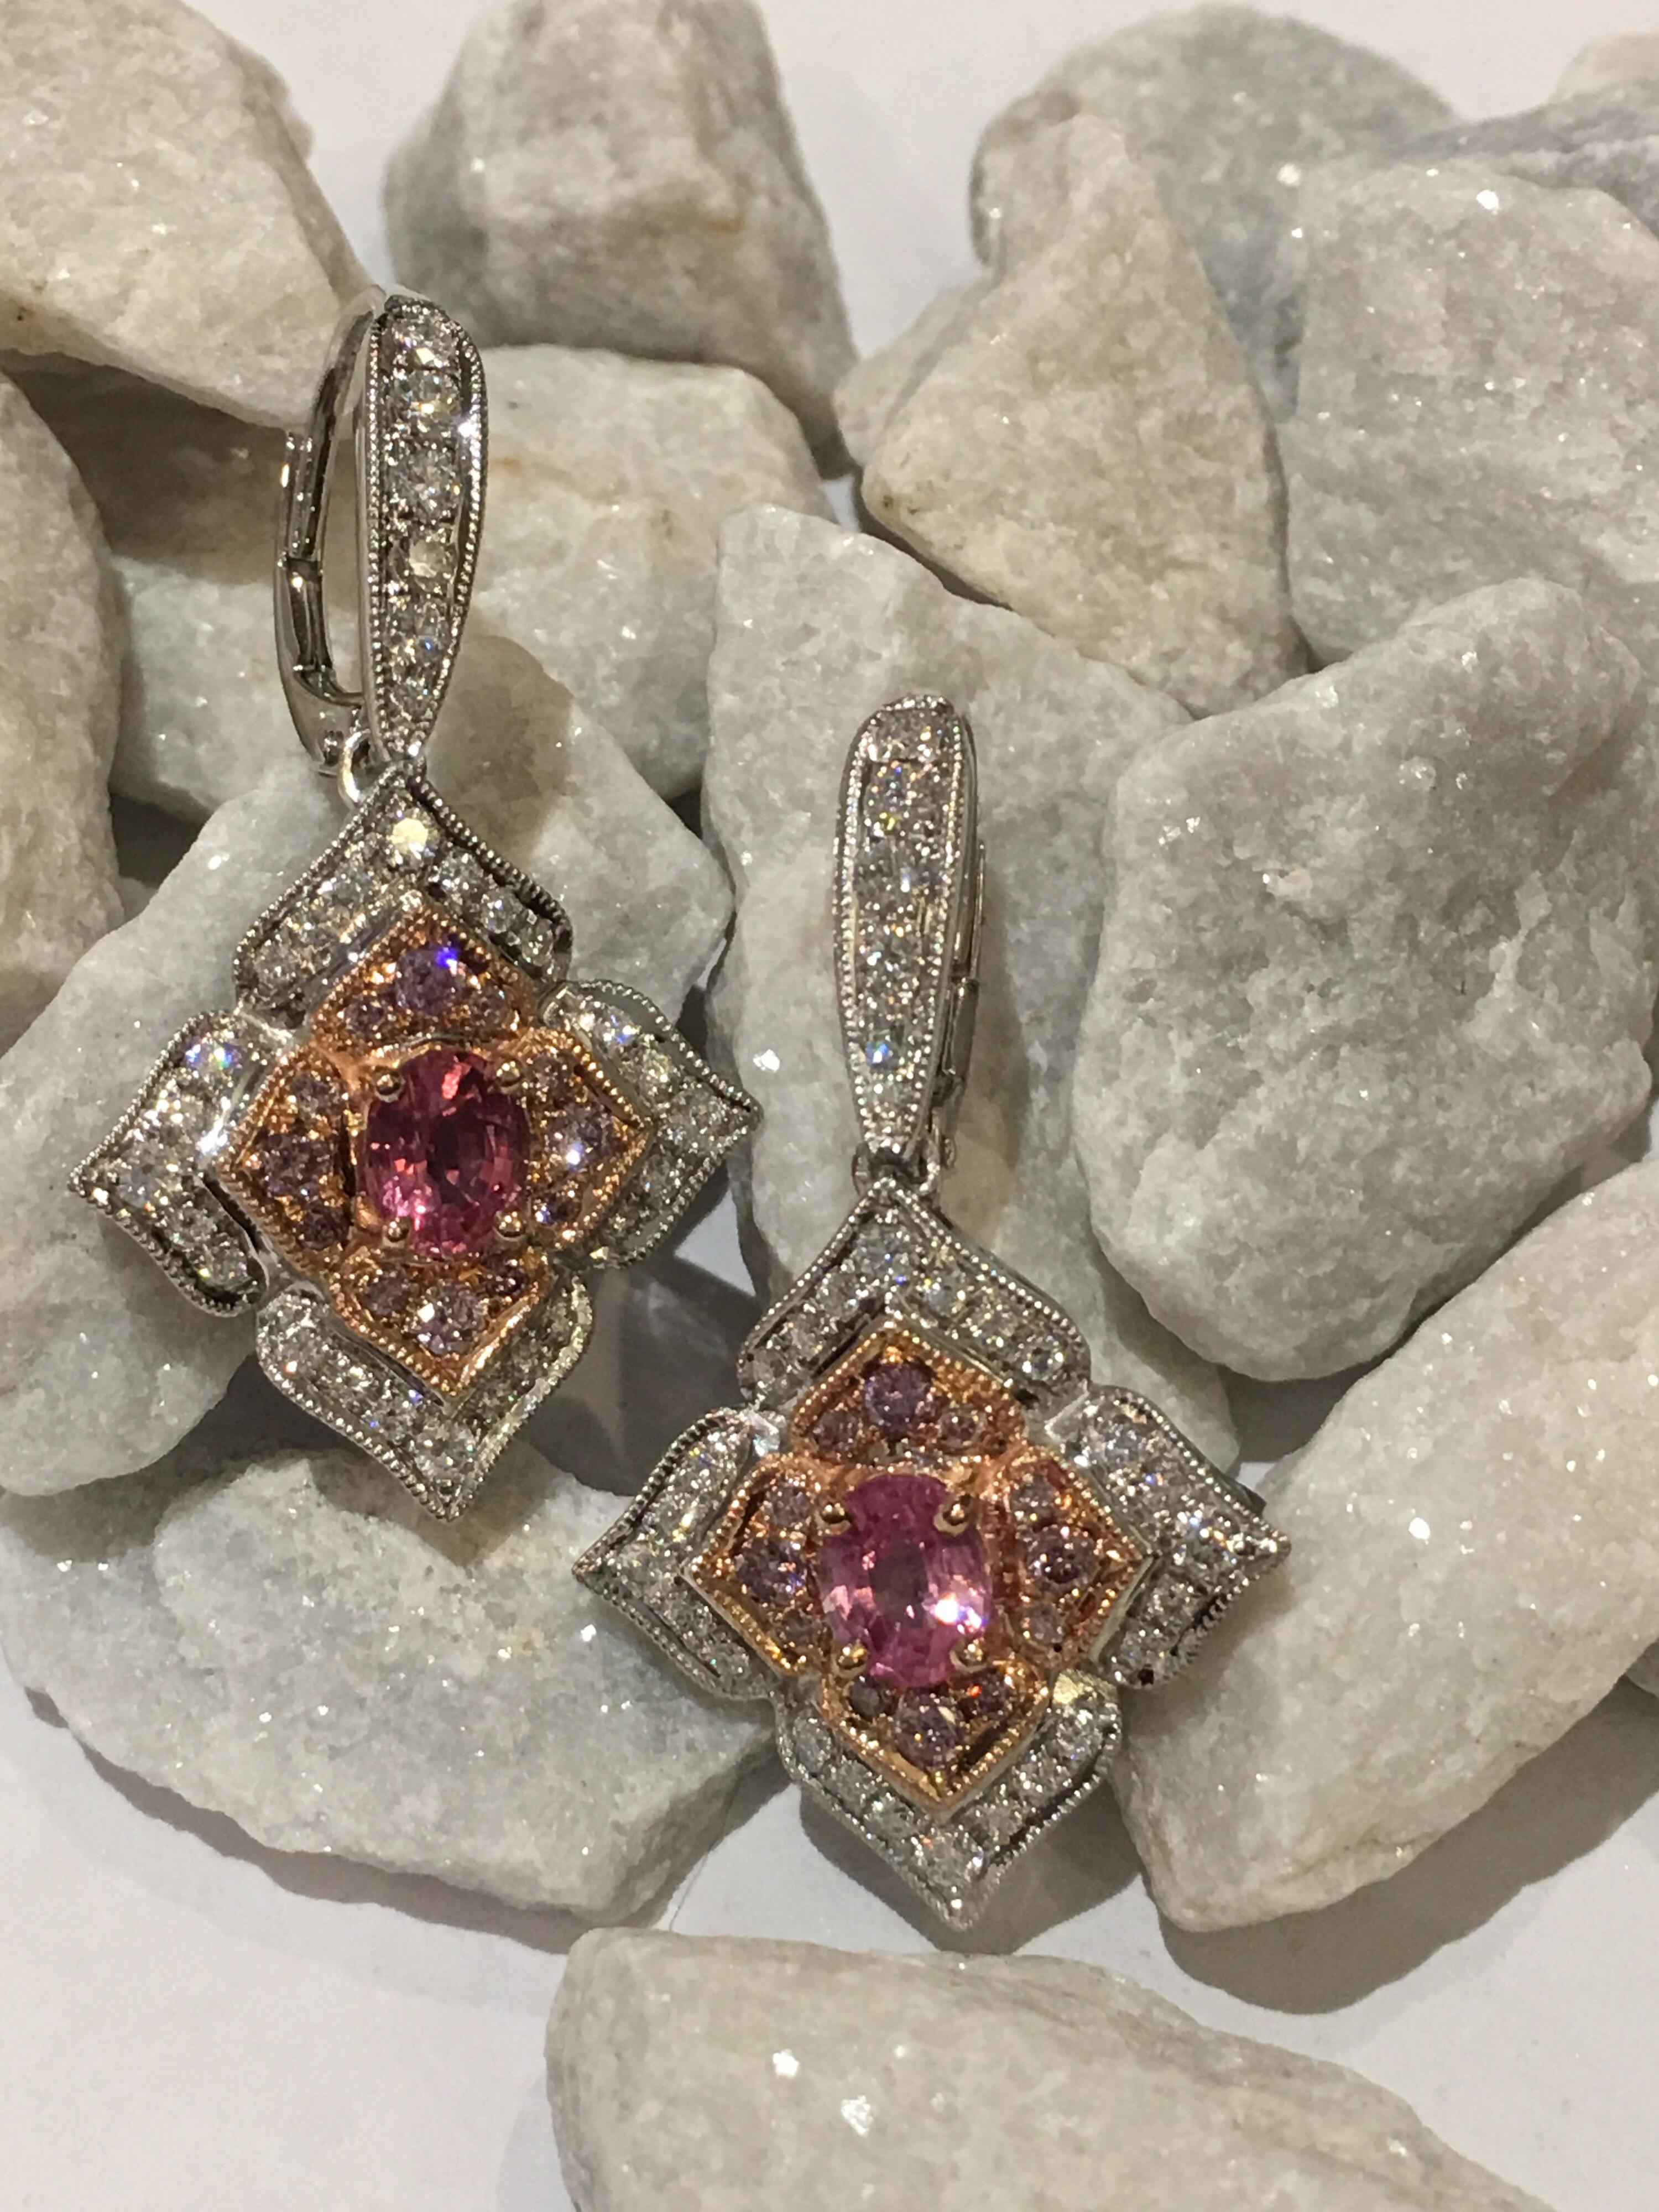 Oval Cut Padparadscha Sapphire Pink and White Diamonds Earrings Set in 14 Karat Gold